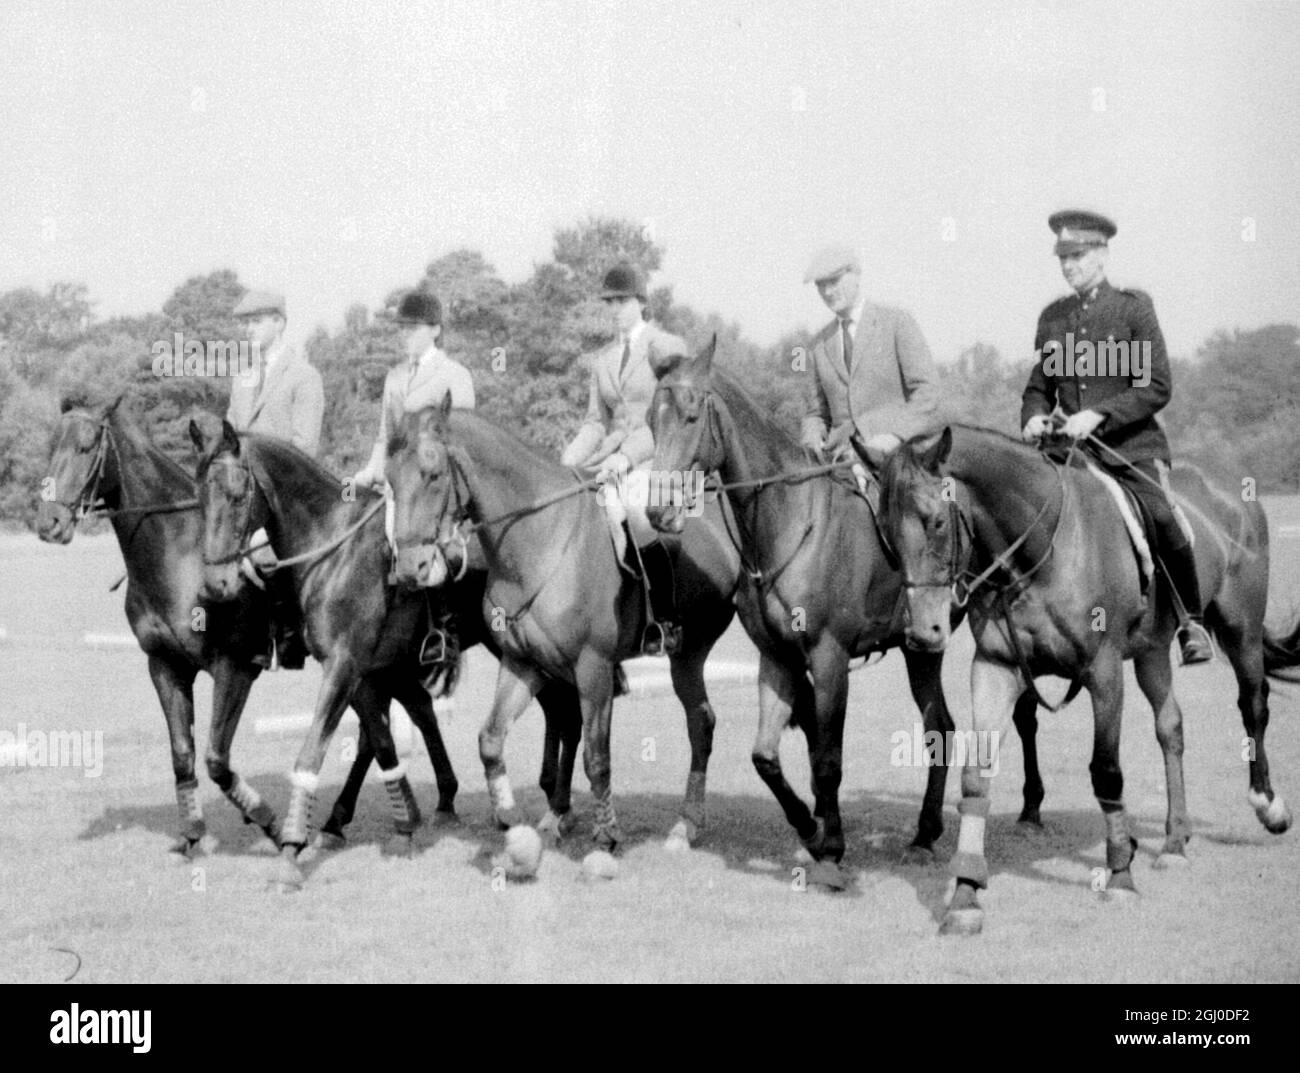 Members of the 1968 British Olympic team which won the gold medal in the three day equestrian team event. L-R: Mr. Richard Meade, Miss Christine Sheppard, Miss Mary MacDonell, Major Derek Allhusen and Sgt. Ben Jones. Pictured at a training session on Smith's Lawn, Windsor Great Park - 27th August 1965 Stock Photo